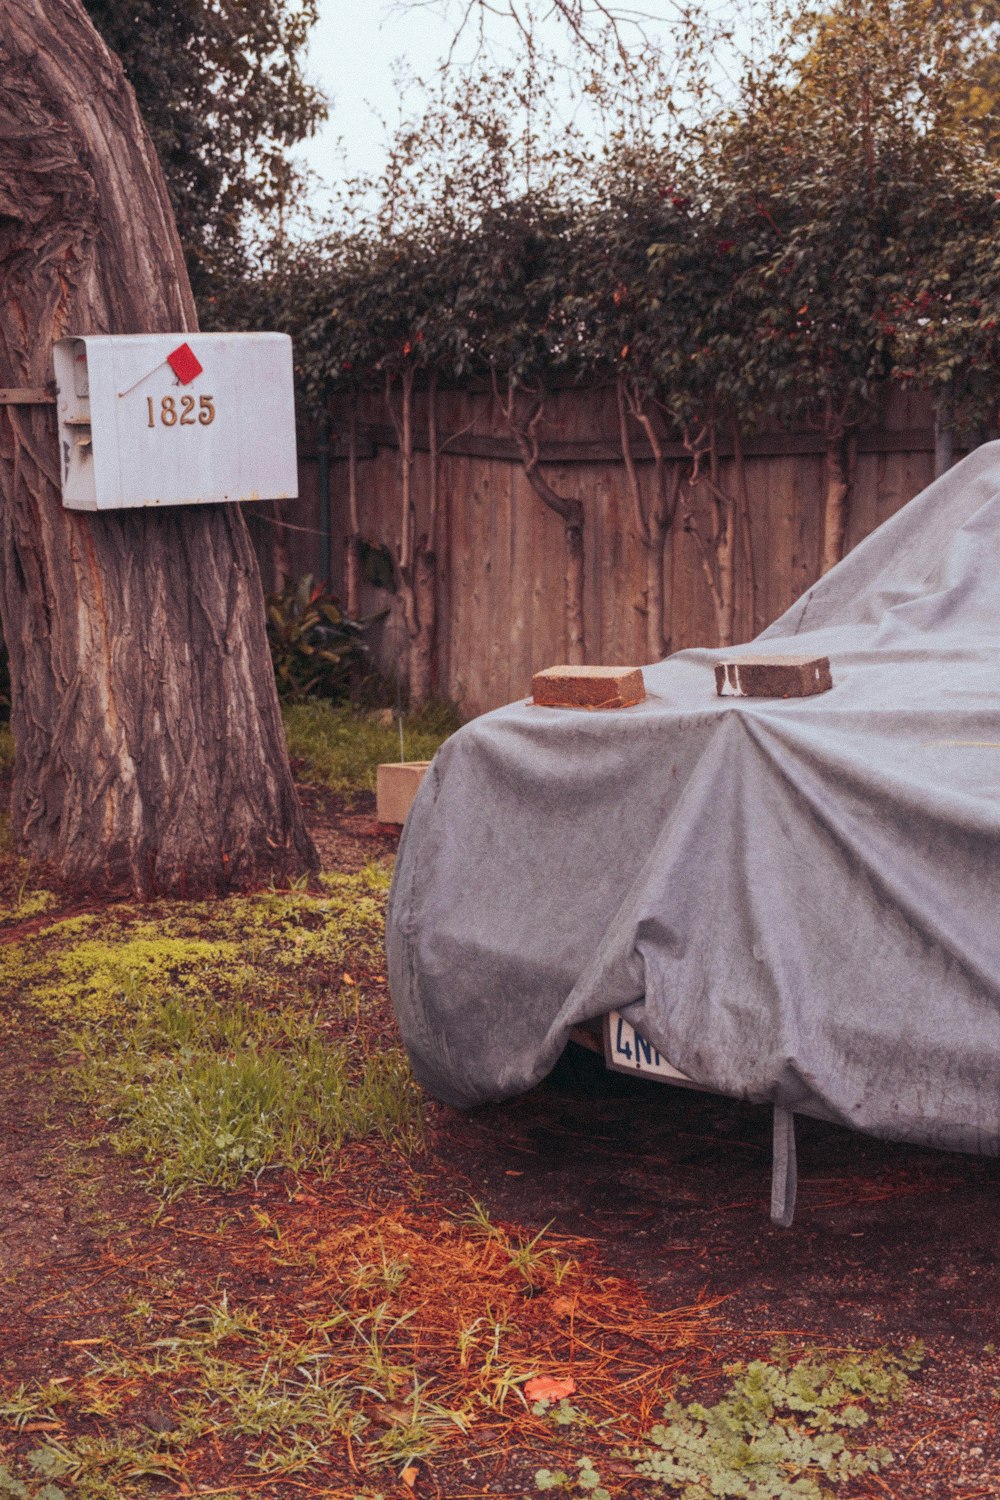 a covered car parked in a yard next to a tree